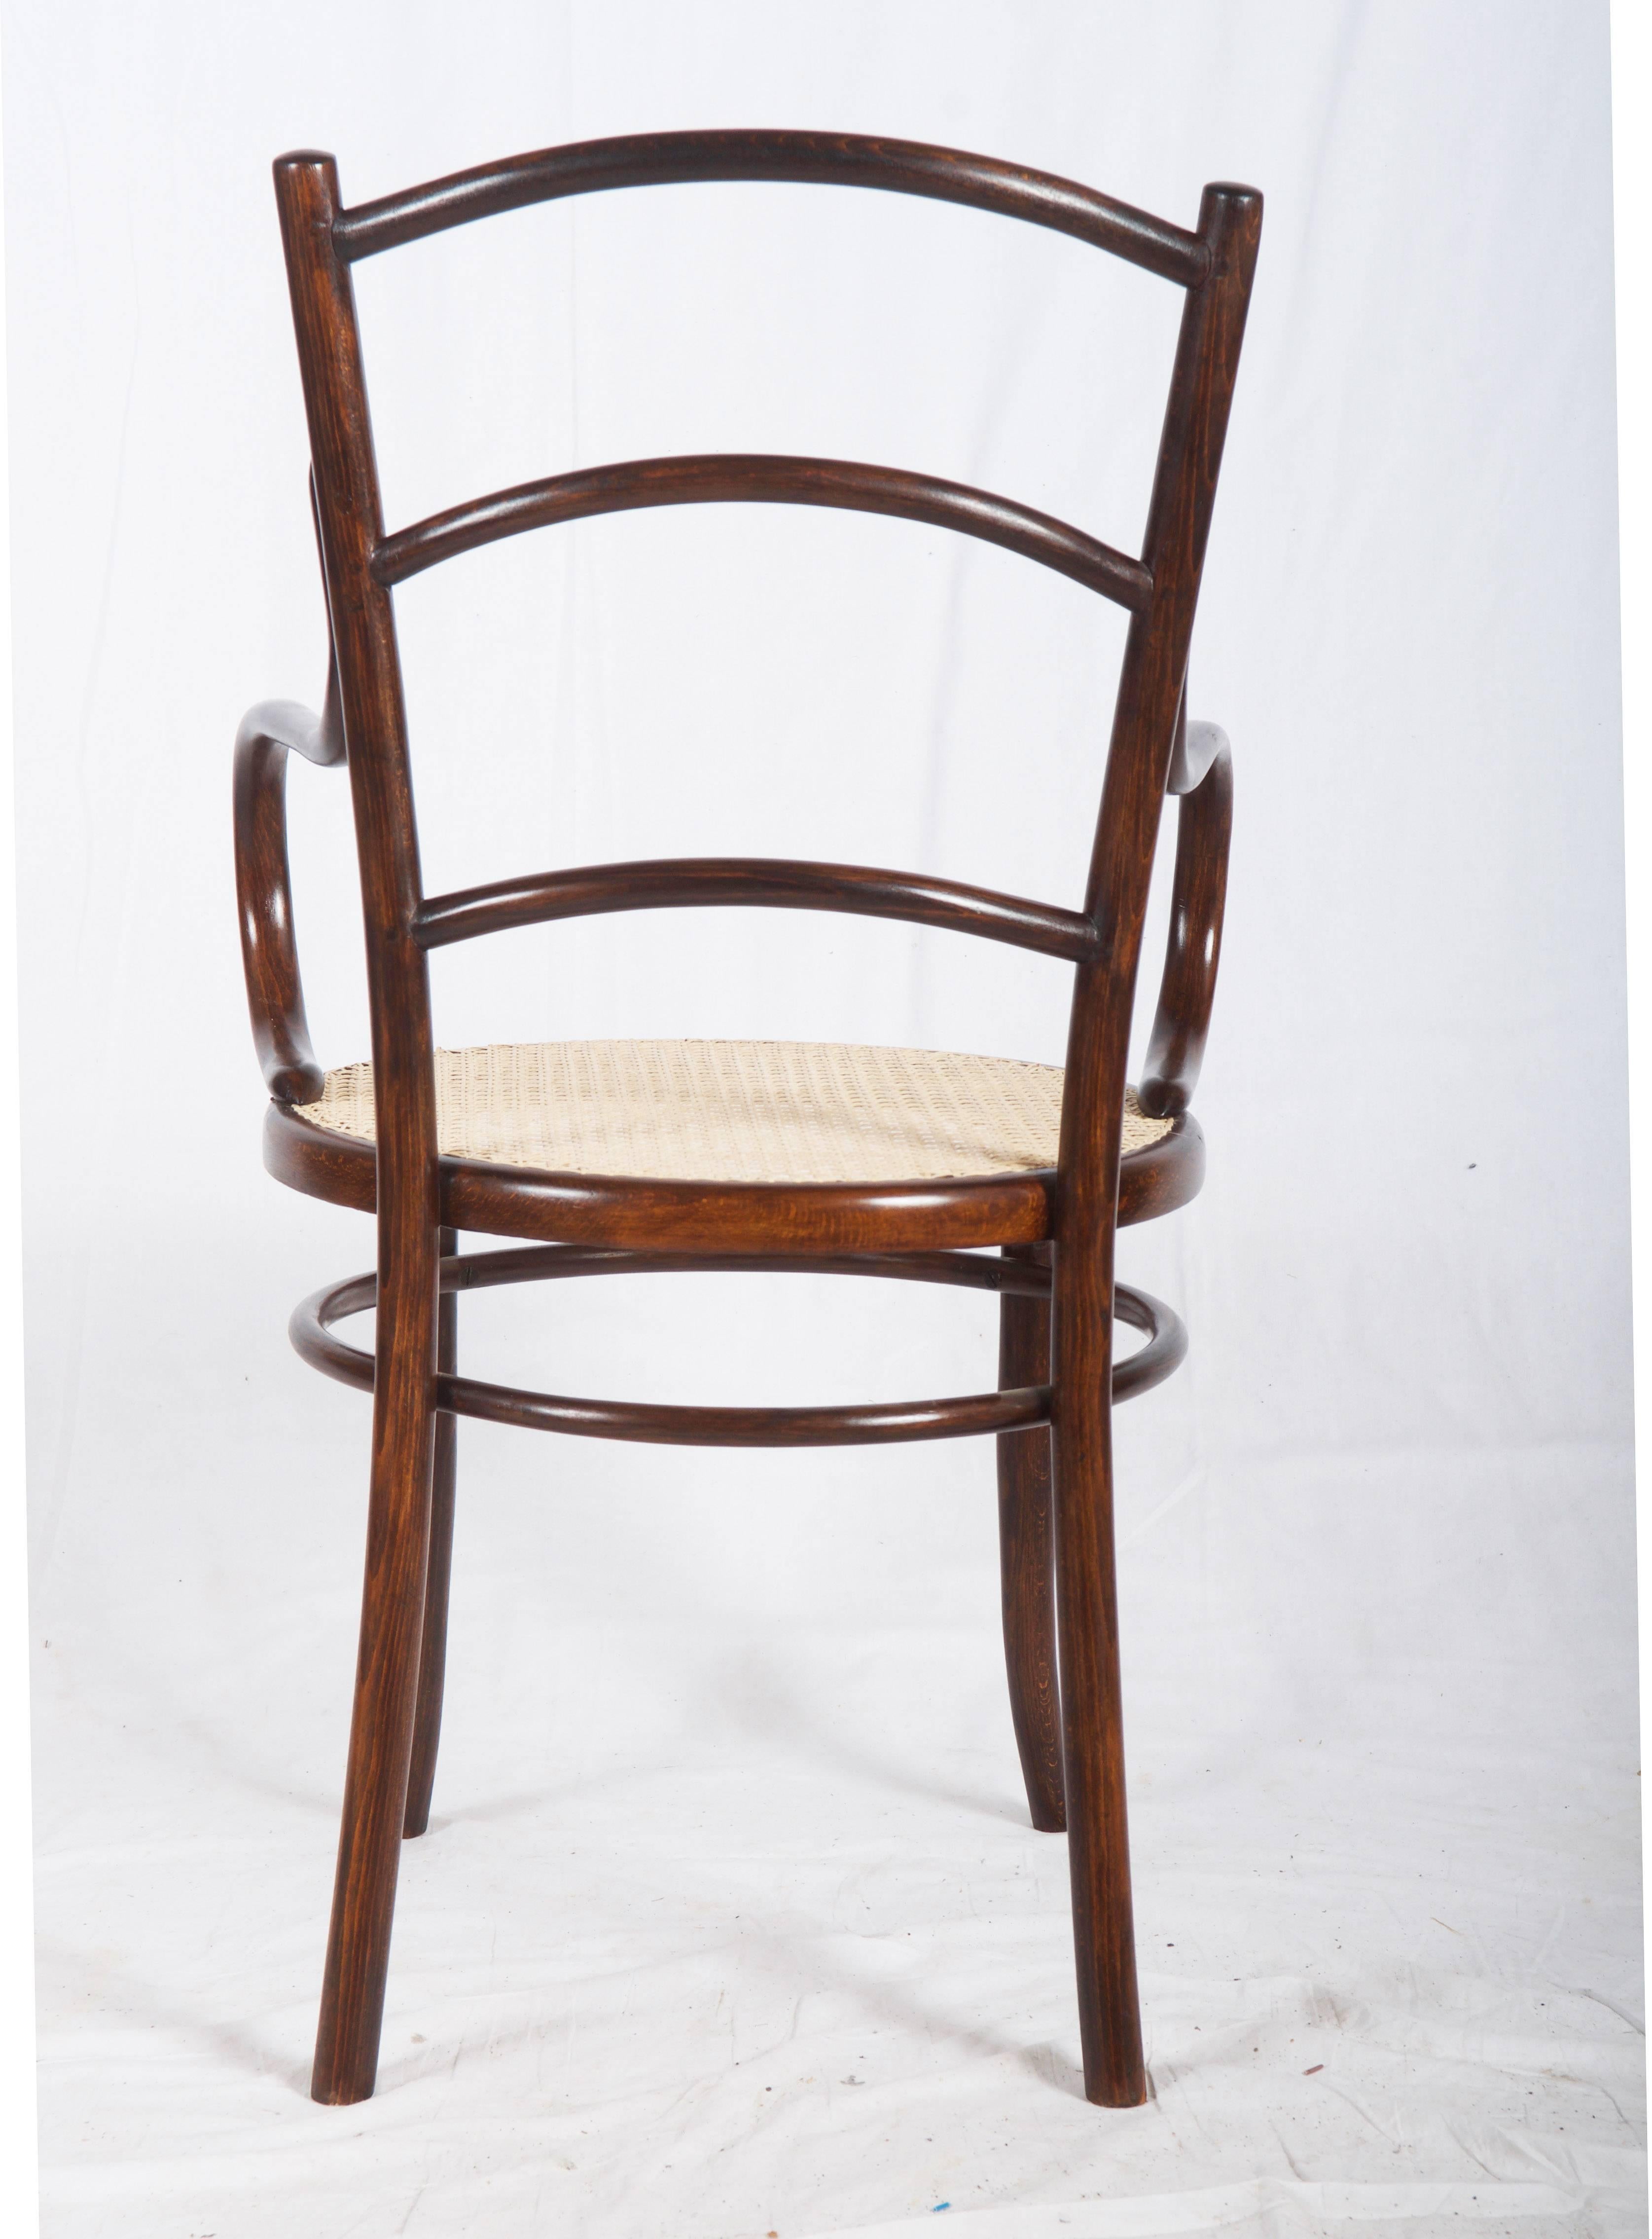 Beech bentwood with canned seat, made in 1900-1910 by Josef Hoffmann Succ. in Bielitz (Poland) formaly Austria.
Fully restored with new canning.